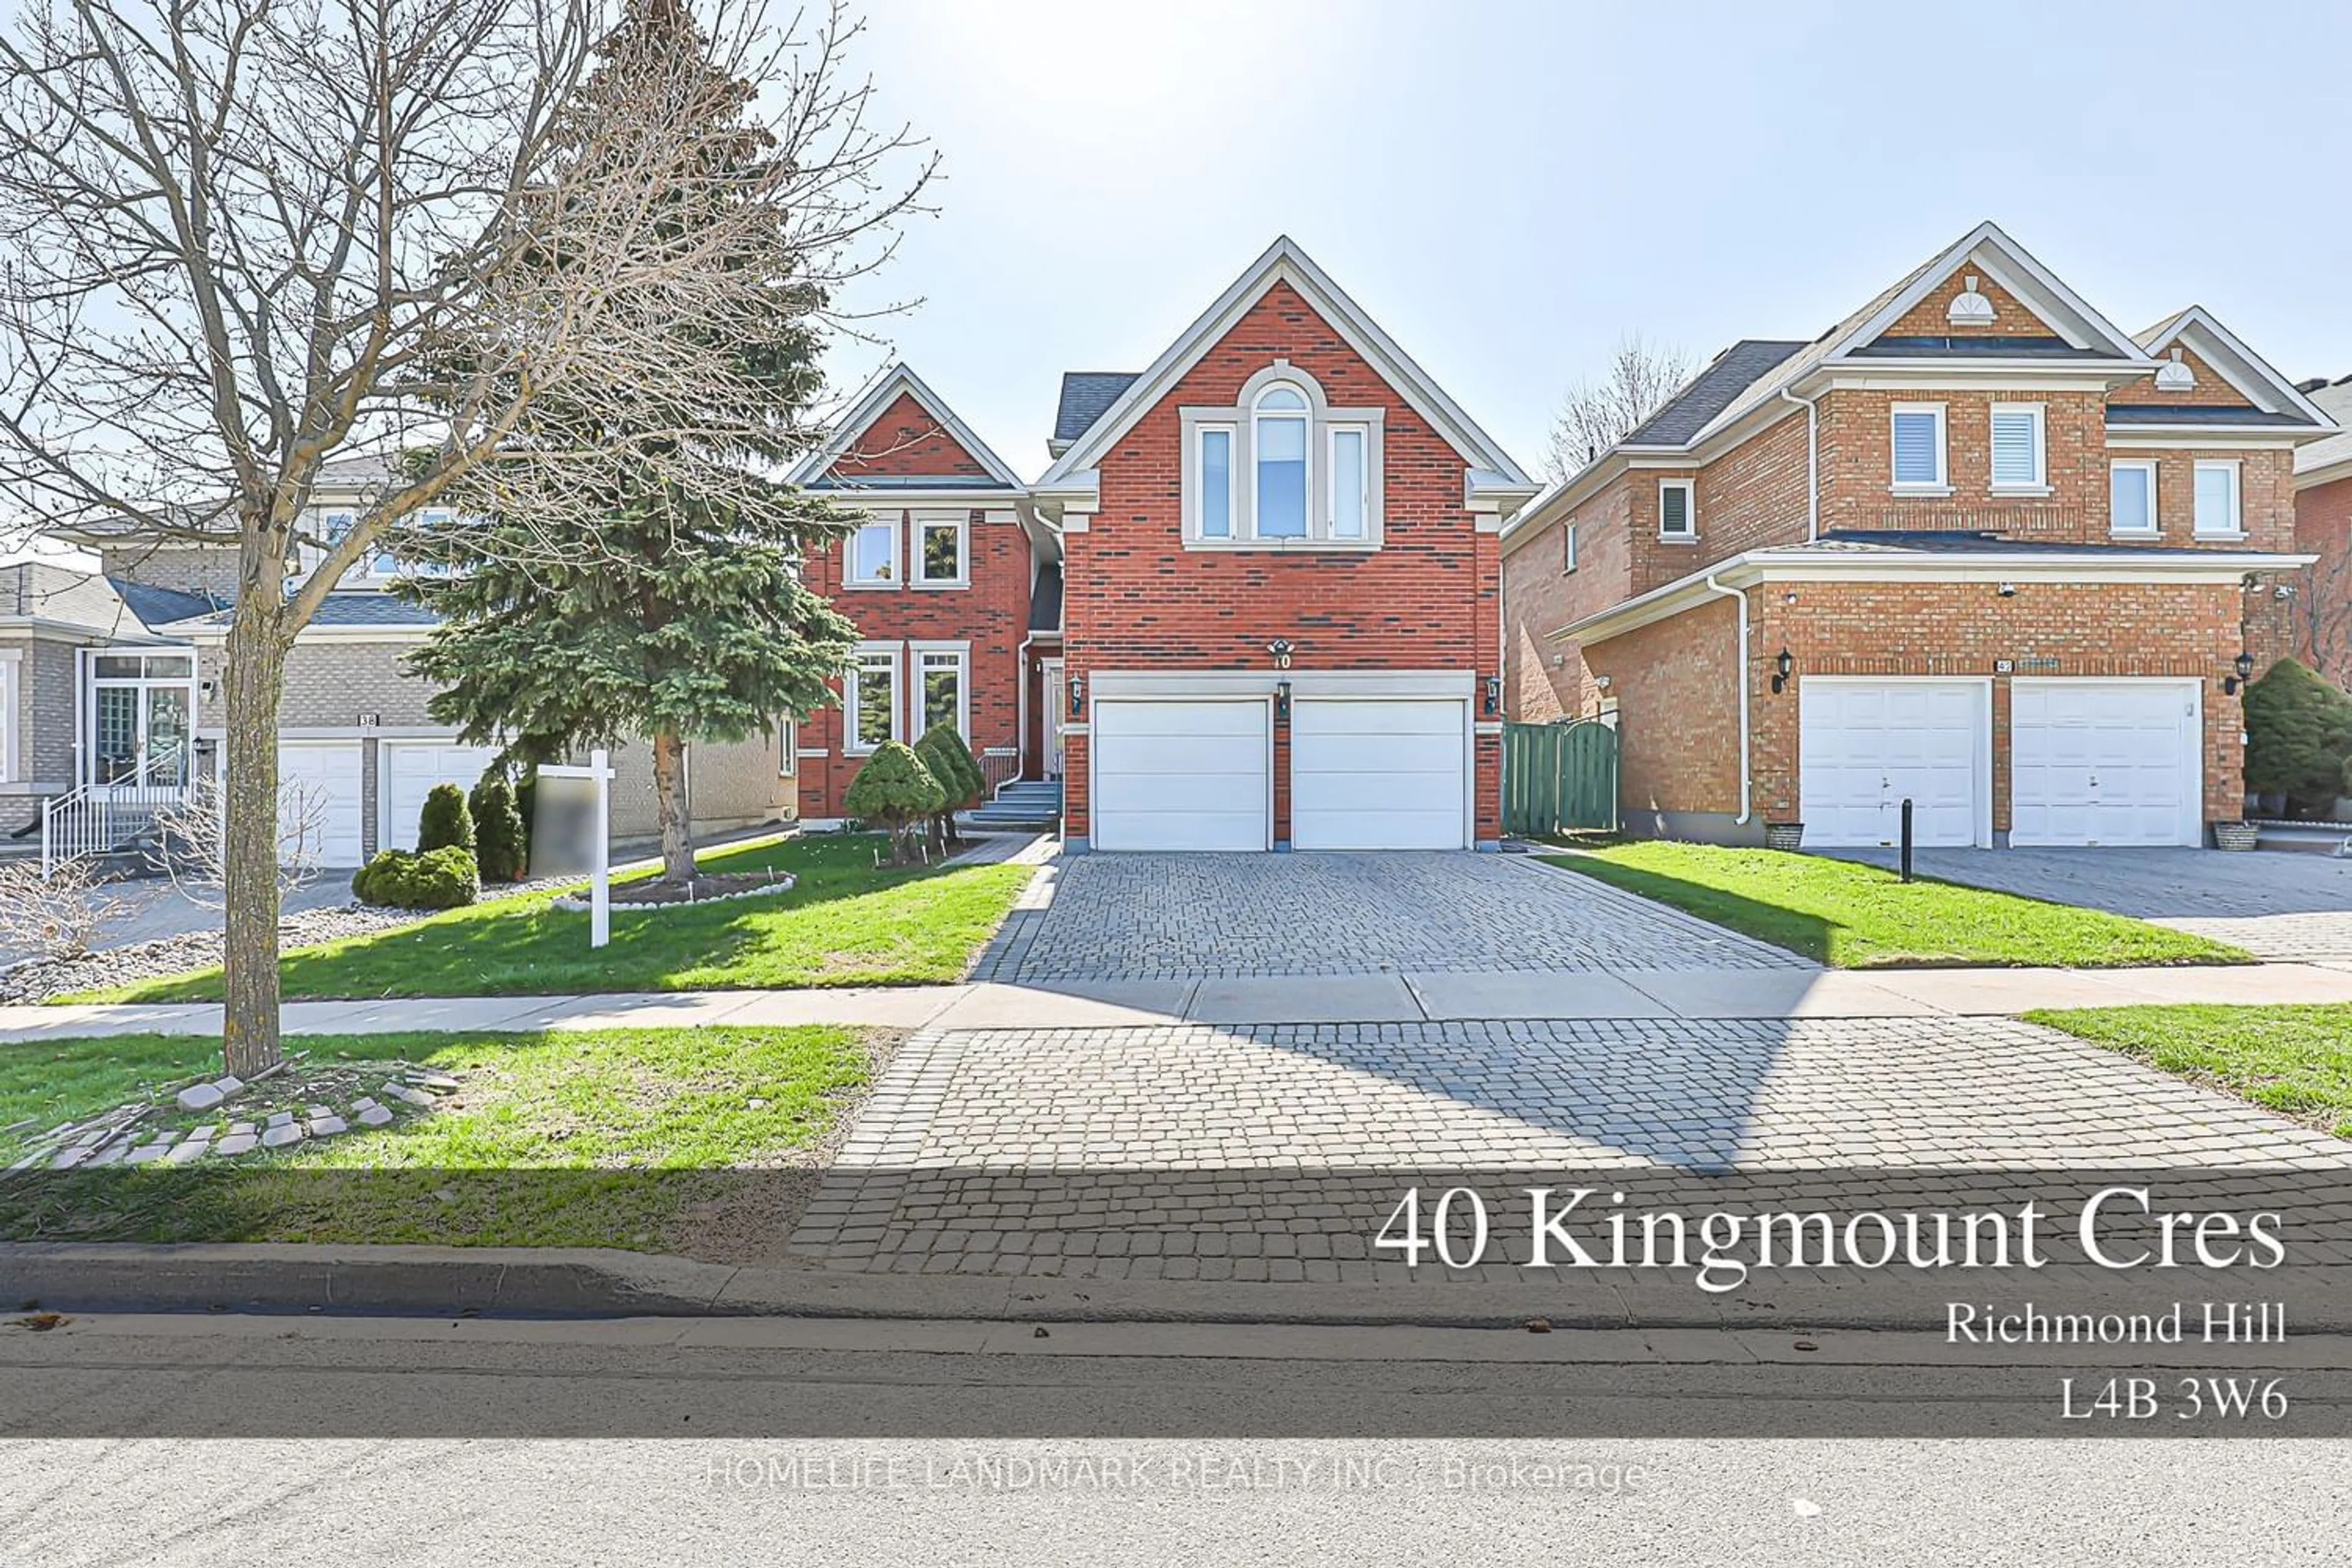 Home with brick exterior material for 40 Kingmount Cres, Richmond Hill Ontario L4B 3W6